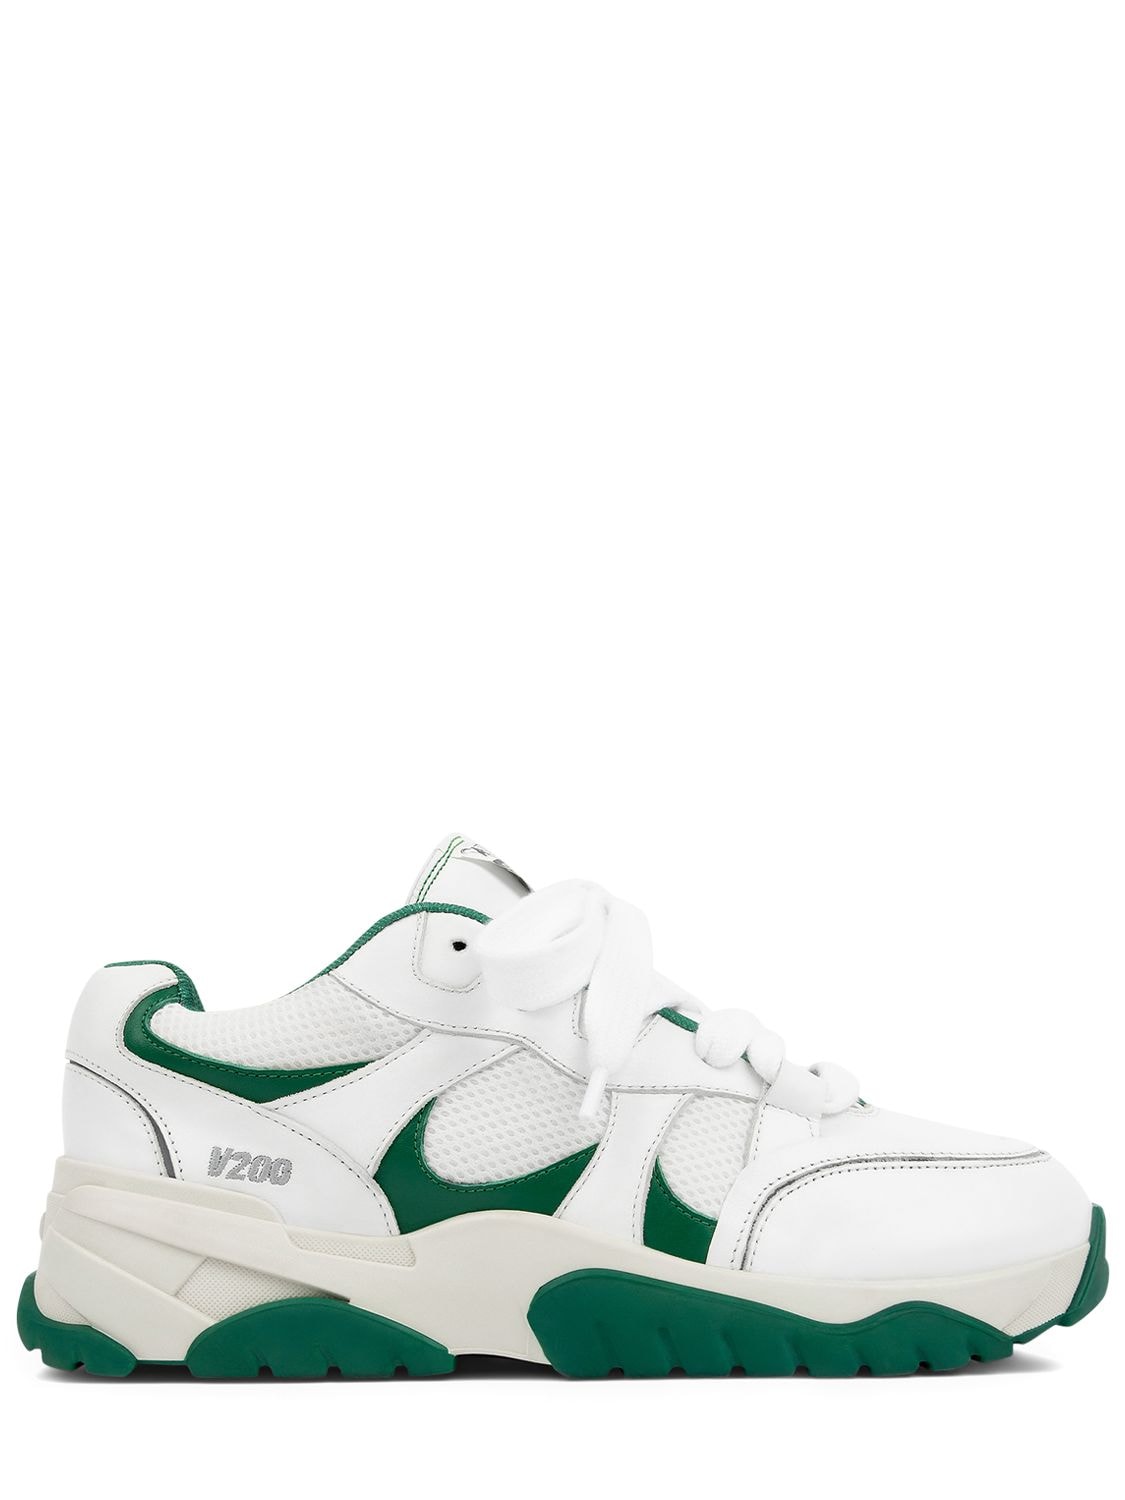 Axel Arigato Catfish Leather Sneakers In White